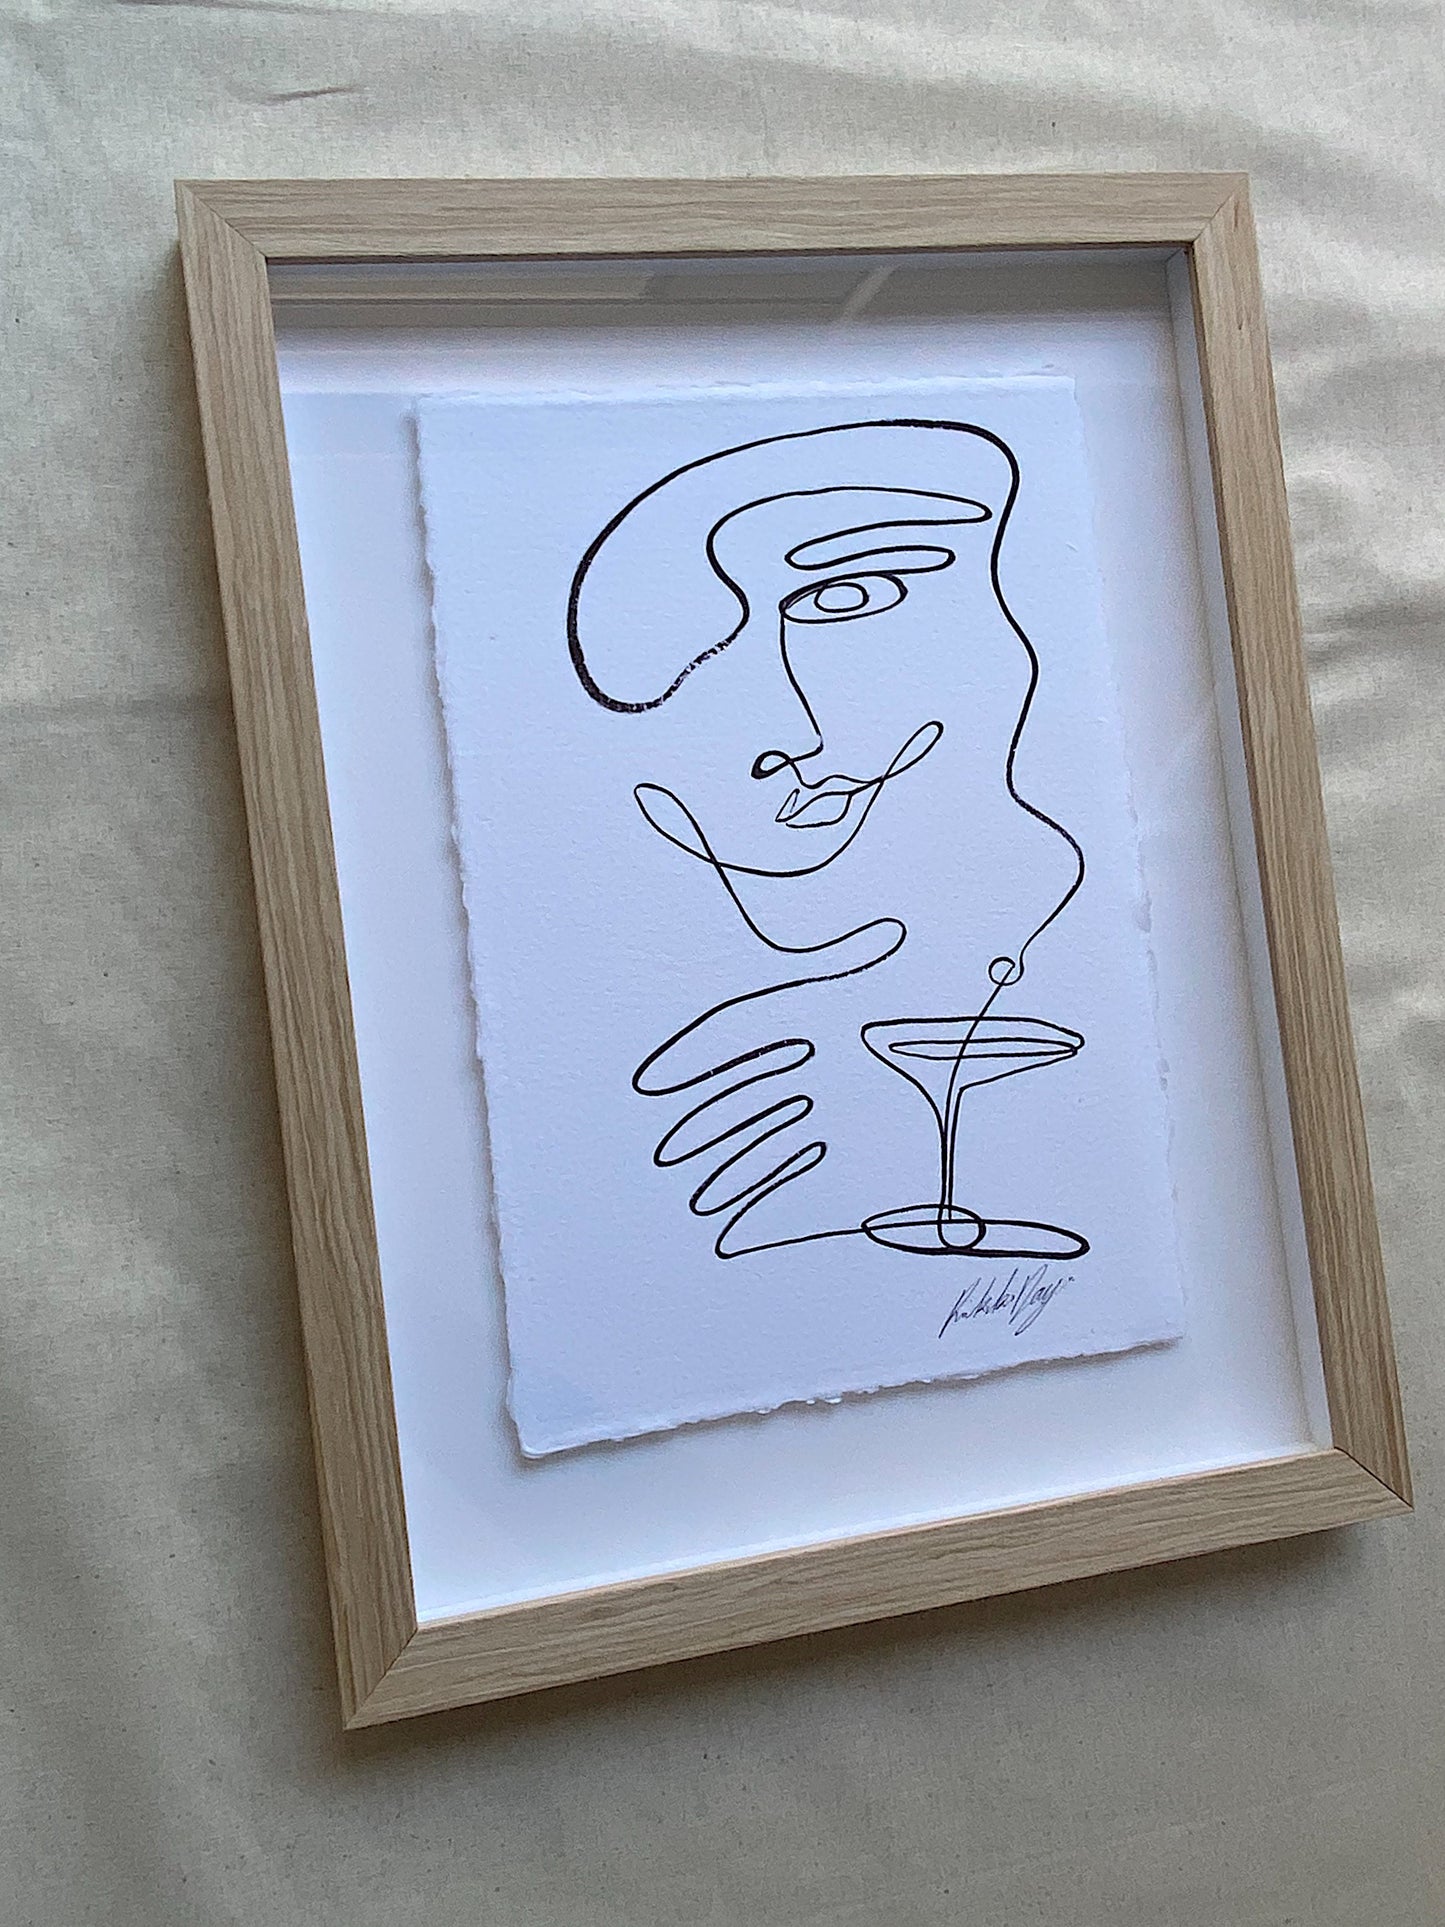 Martini on a pleather couch - Acrylic on cotton paper. Framed. 410mm x 320mm